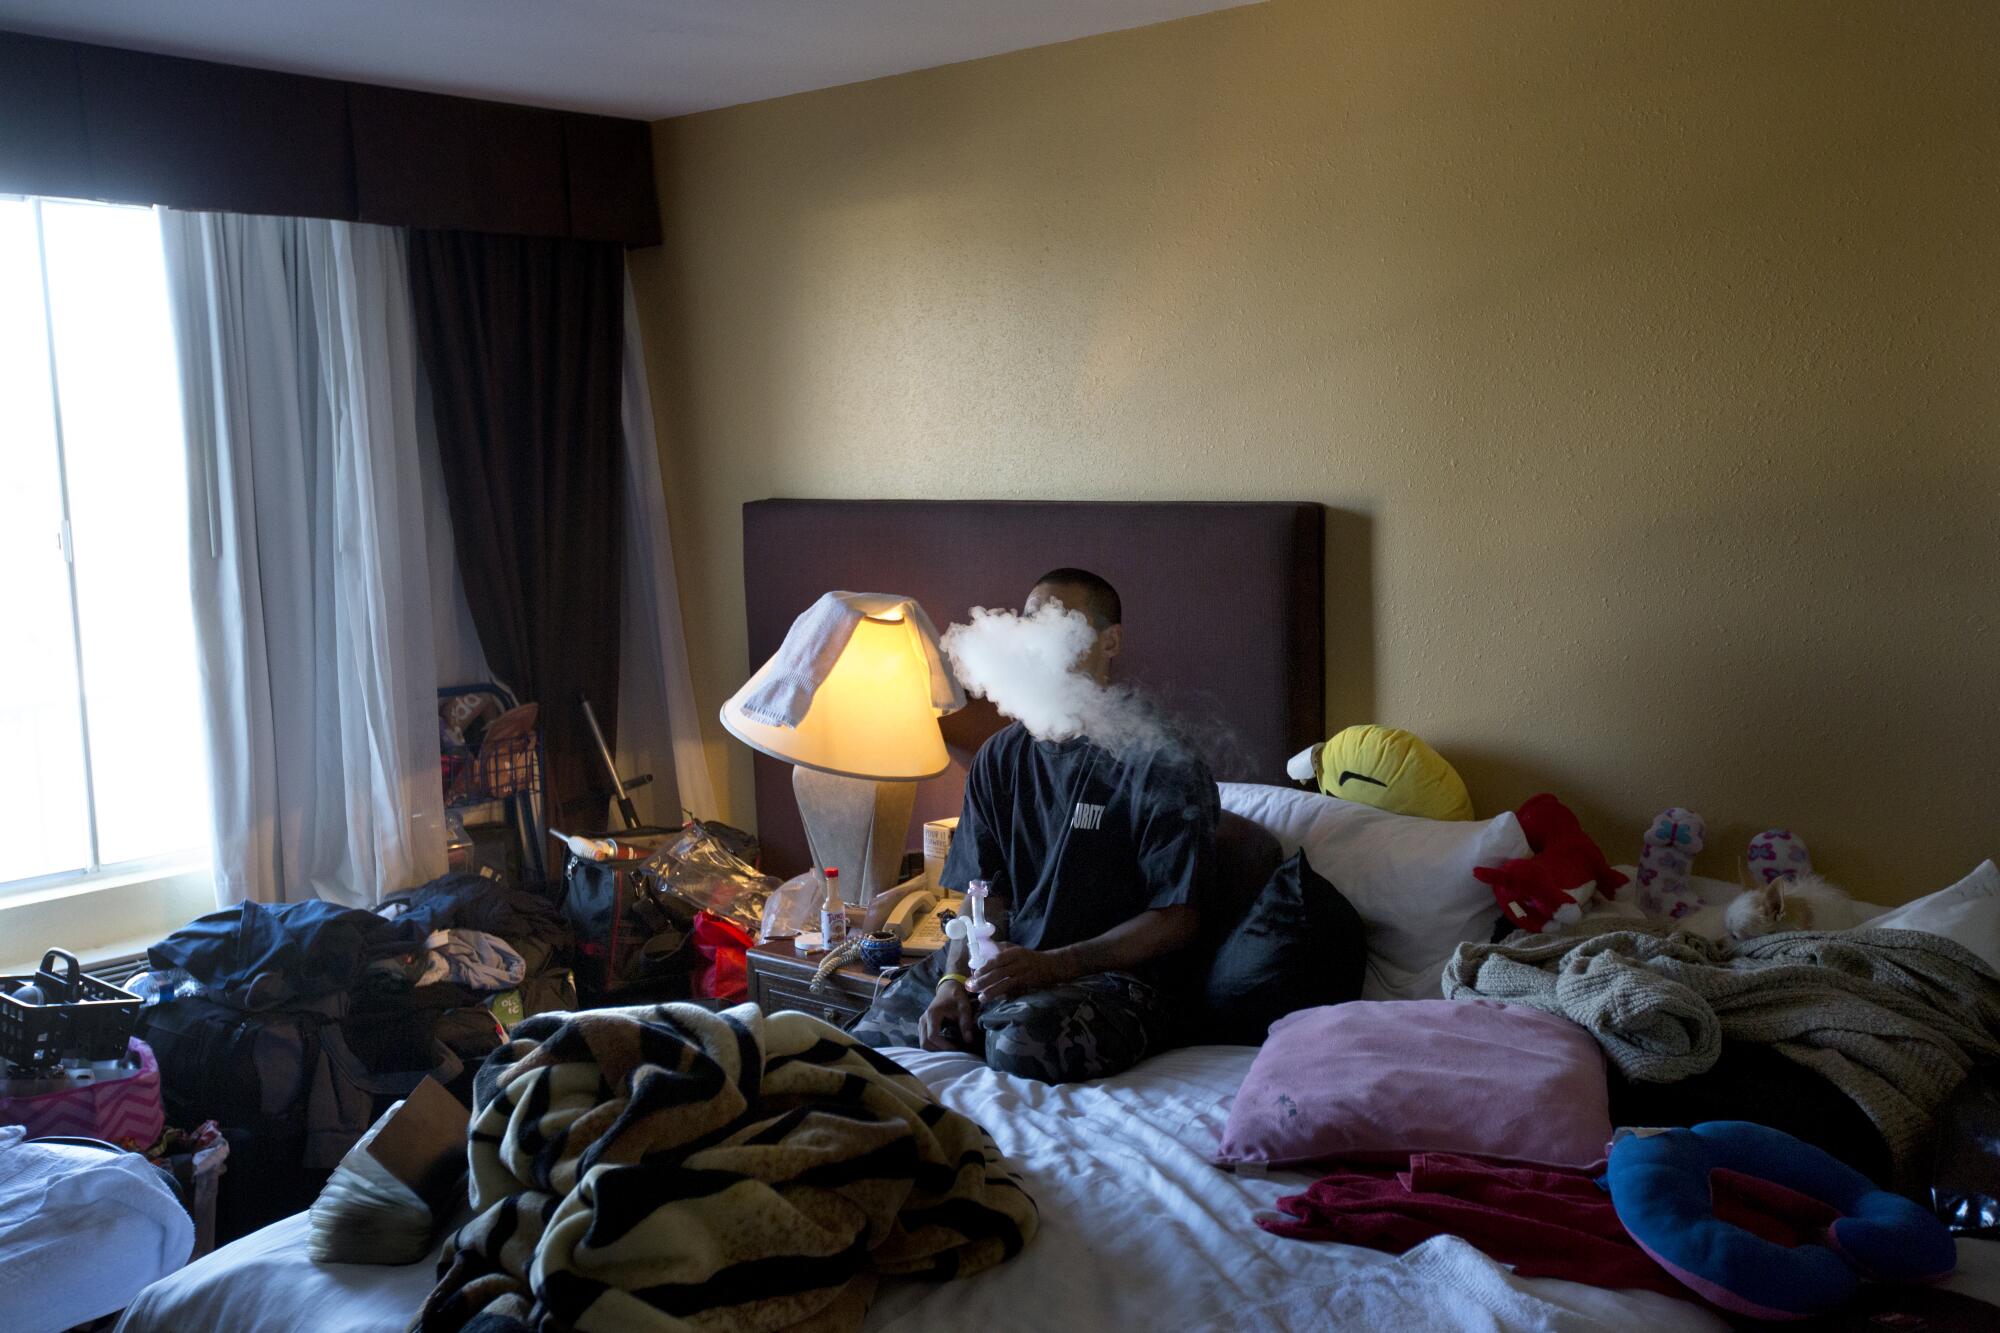 A man from a homeless encampment in Encino smokes crystal meth in his hotel room.